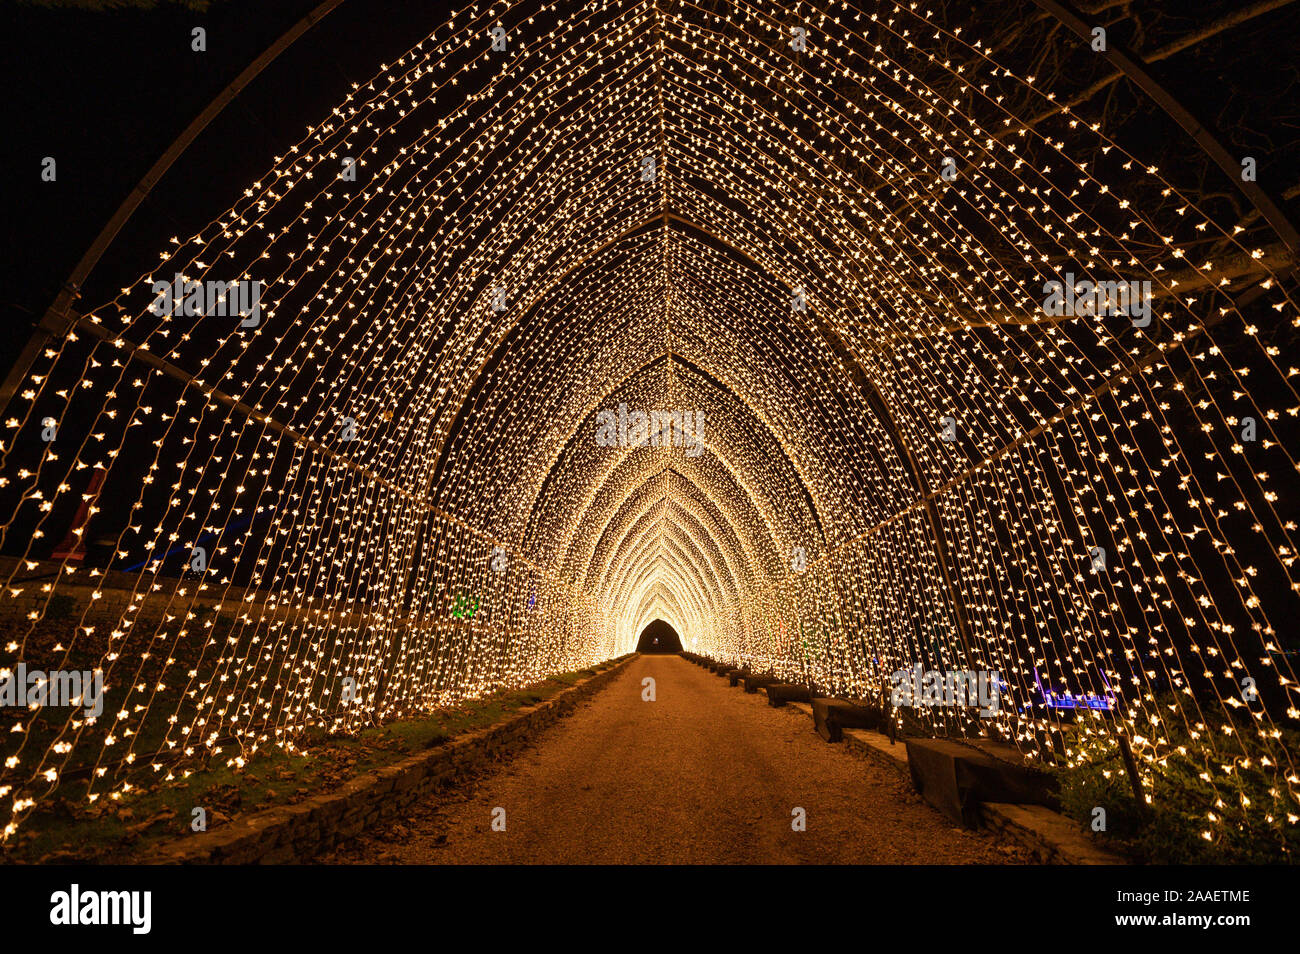 Blenheim Palace, Oxfordshire, UK. 21st Nov, 2019. Light installations in the grounds of Blenheim Palace as part of their Christmas celebrations. Credit: Andrew Walmsley/Alamy Live News Stock Photo